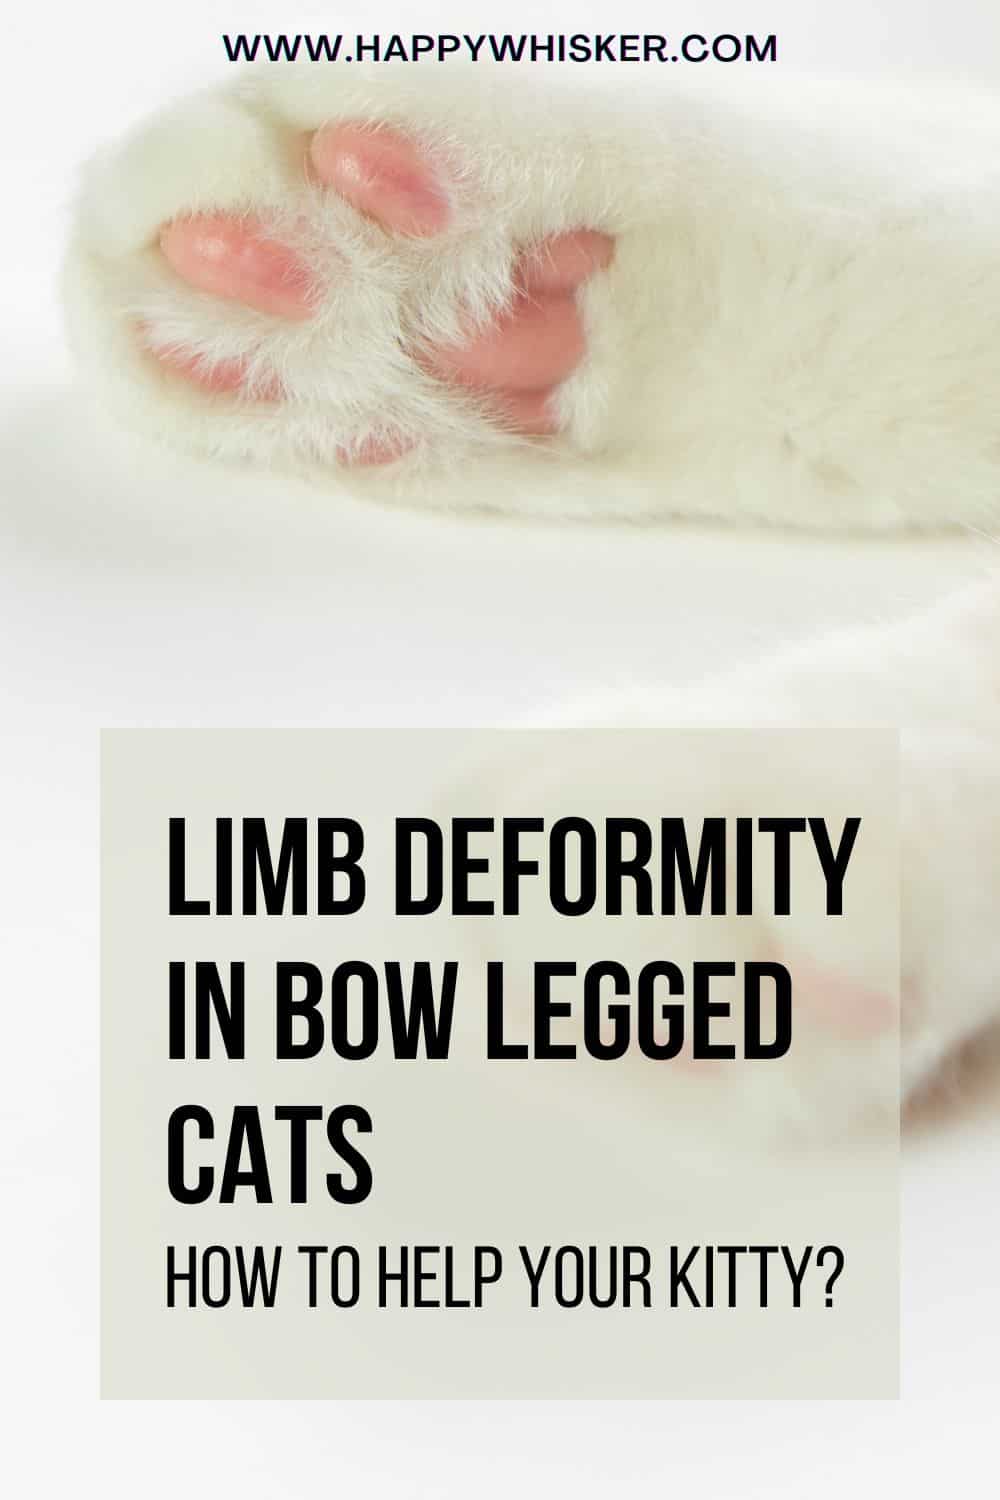 Limb Deformity In Bow Legged Cats - How To Help Your Kitty Pinterest